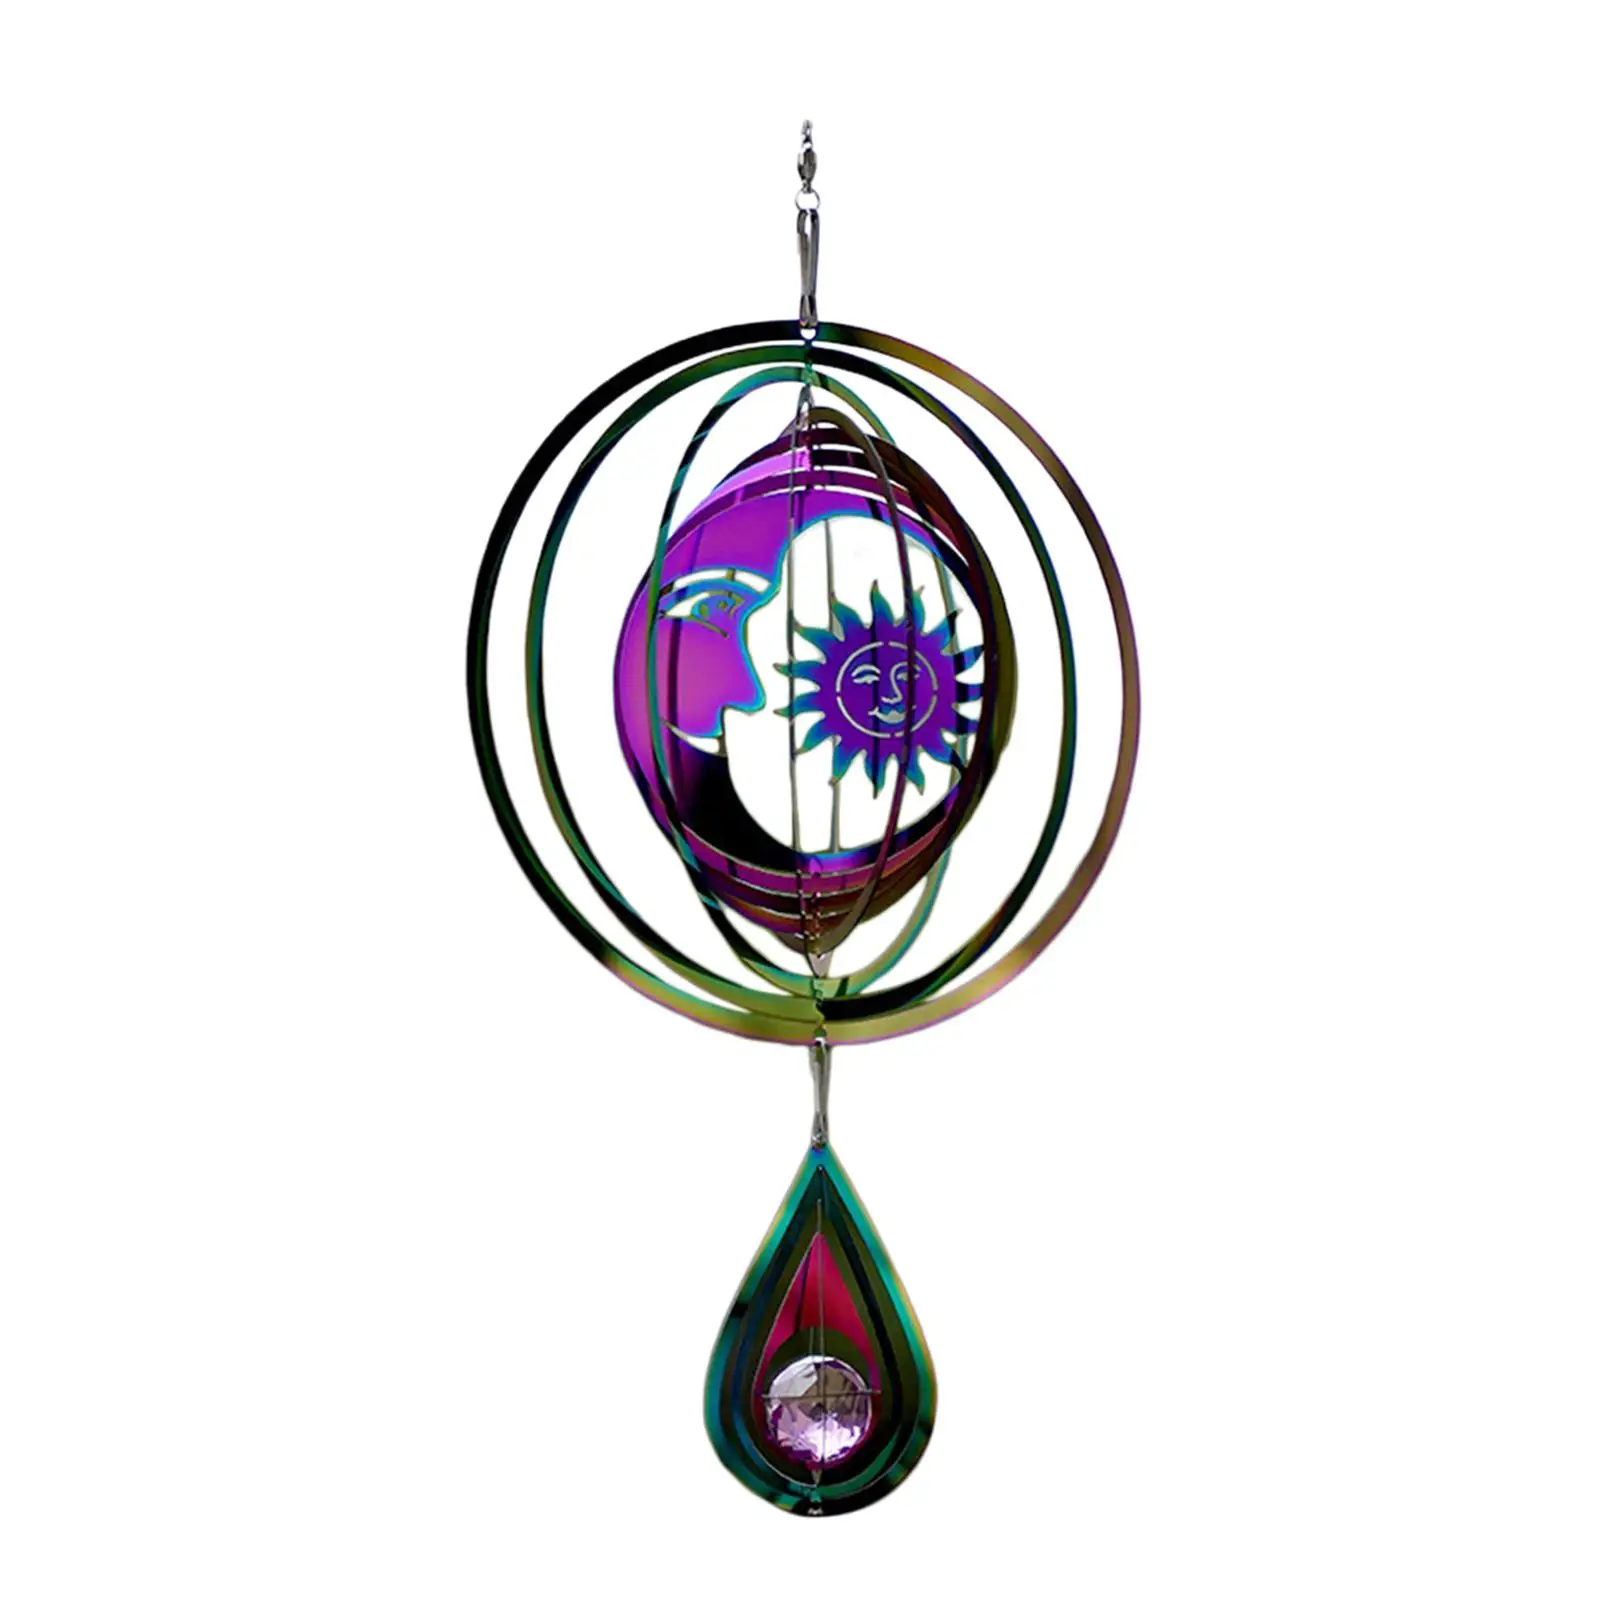 3D Wind Spinner Garden Decoration Rotating Pendant Weatherproof Windmill Hanging Wind Sculpture for Outdoor Farm Home Yard Patio